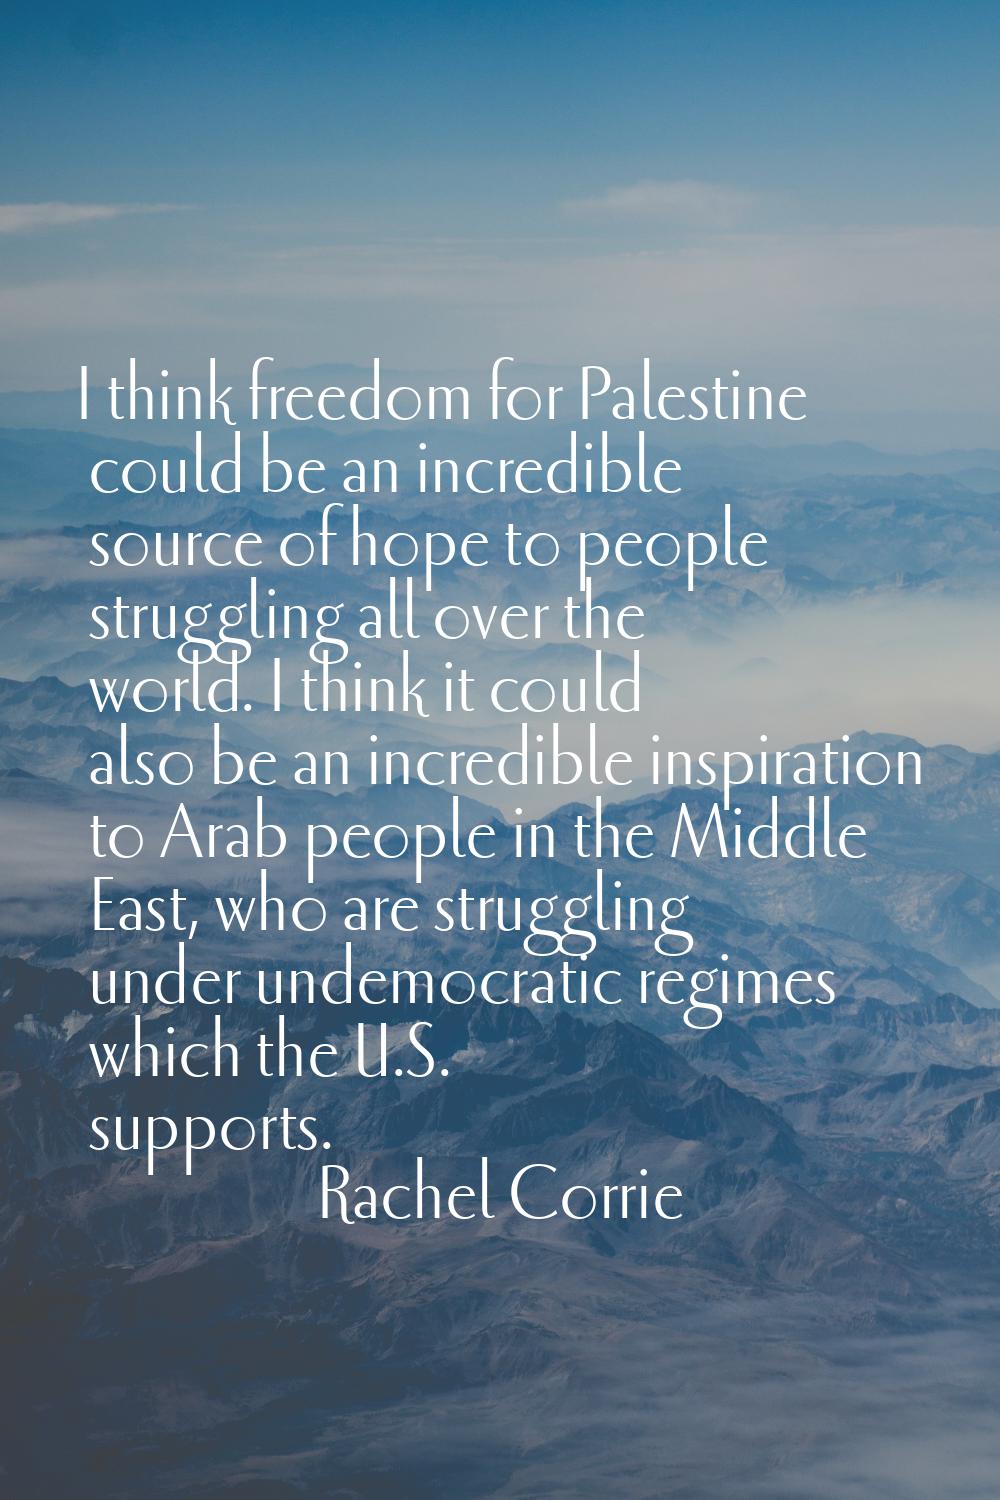 I think freedom for Palestine could be an incredible source of hope to people struggling all over t